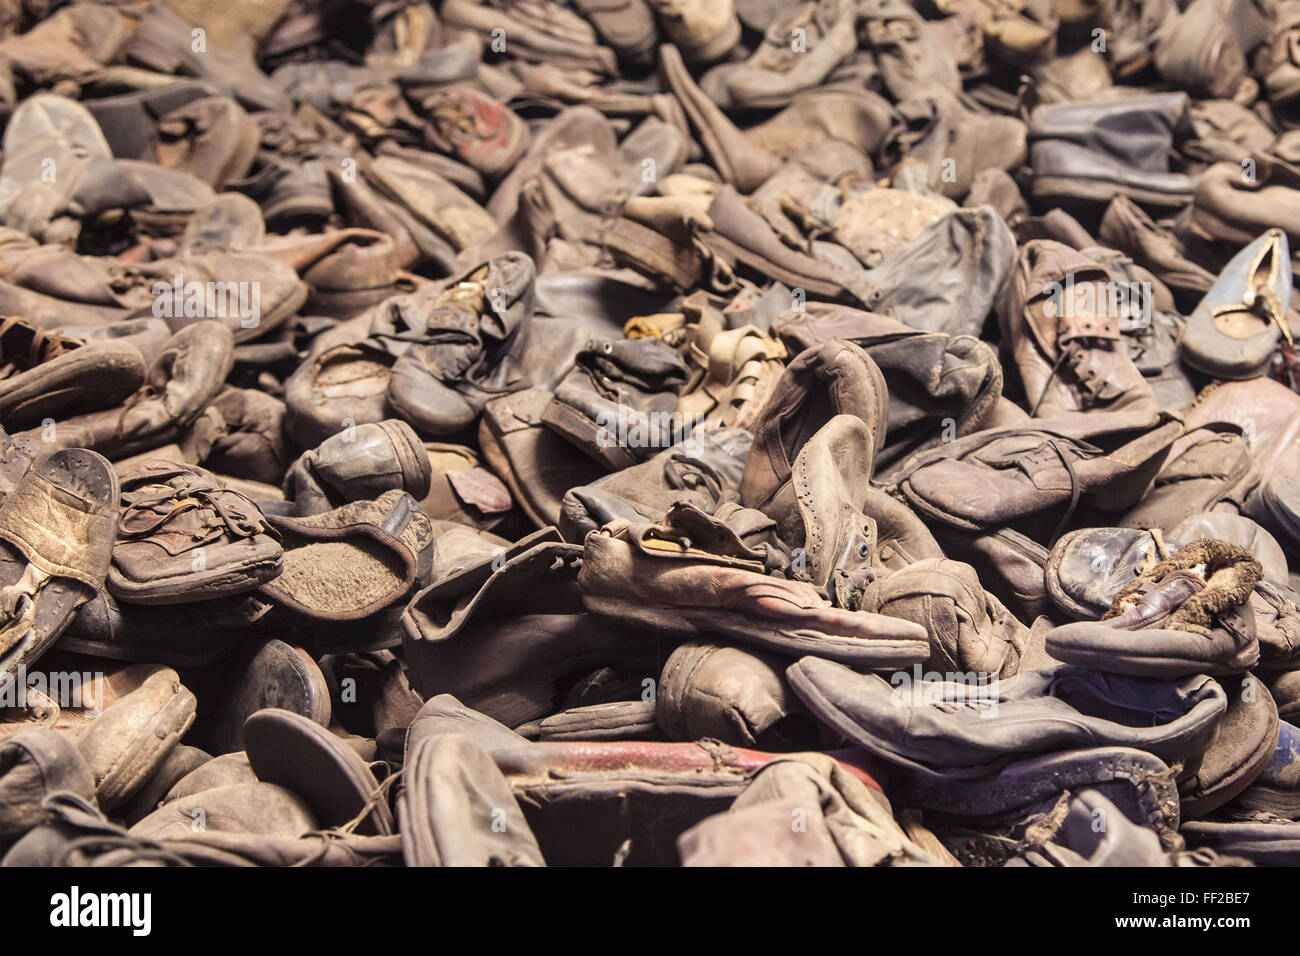 Shoes Of Auschwitz Victims Stock Photo 95324607 Alamy